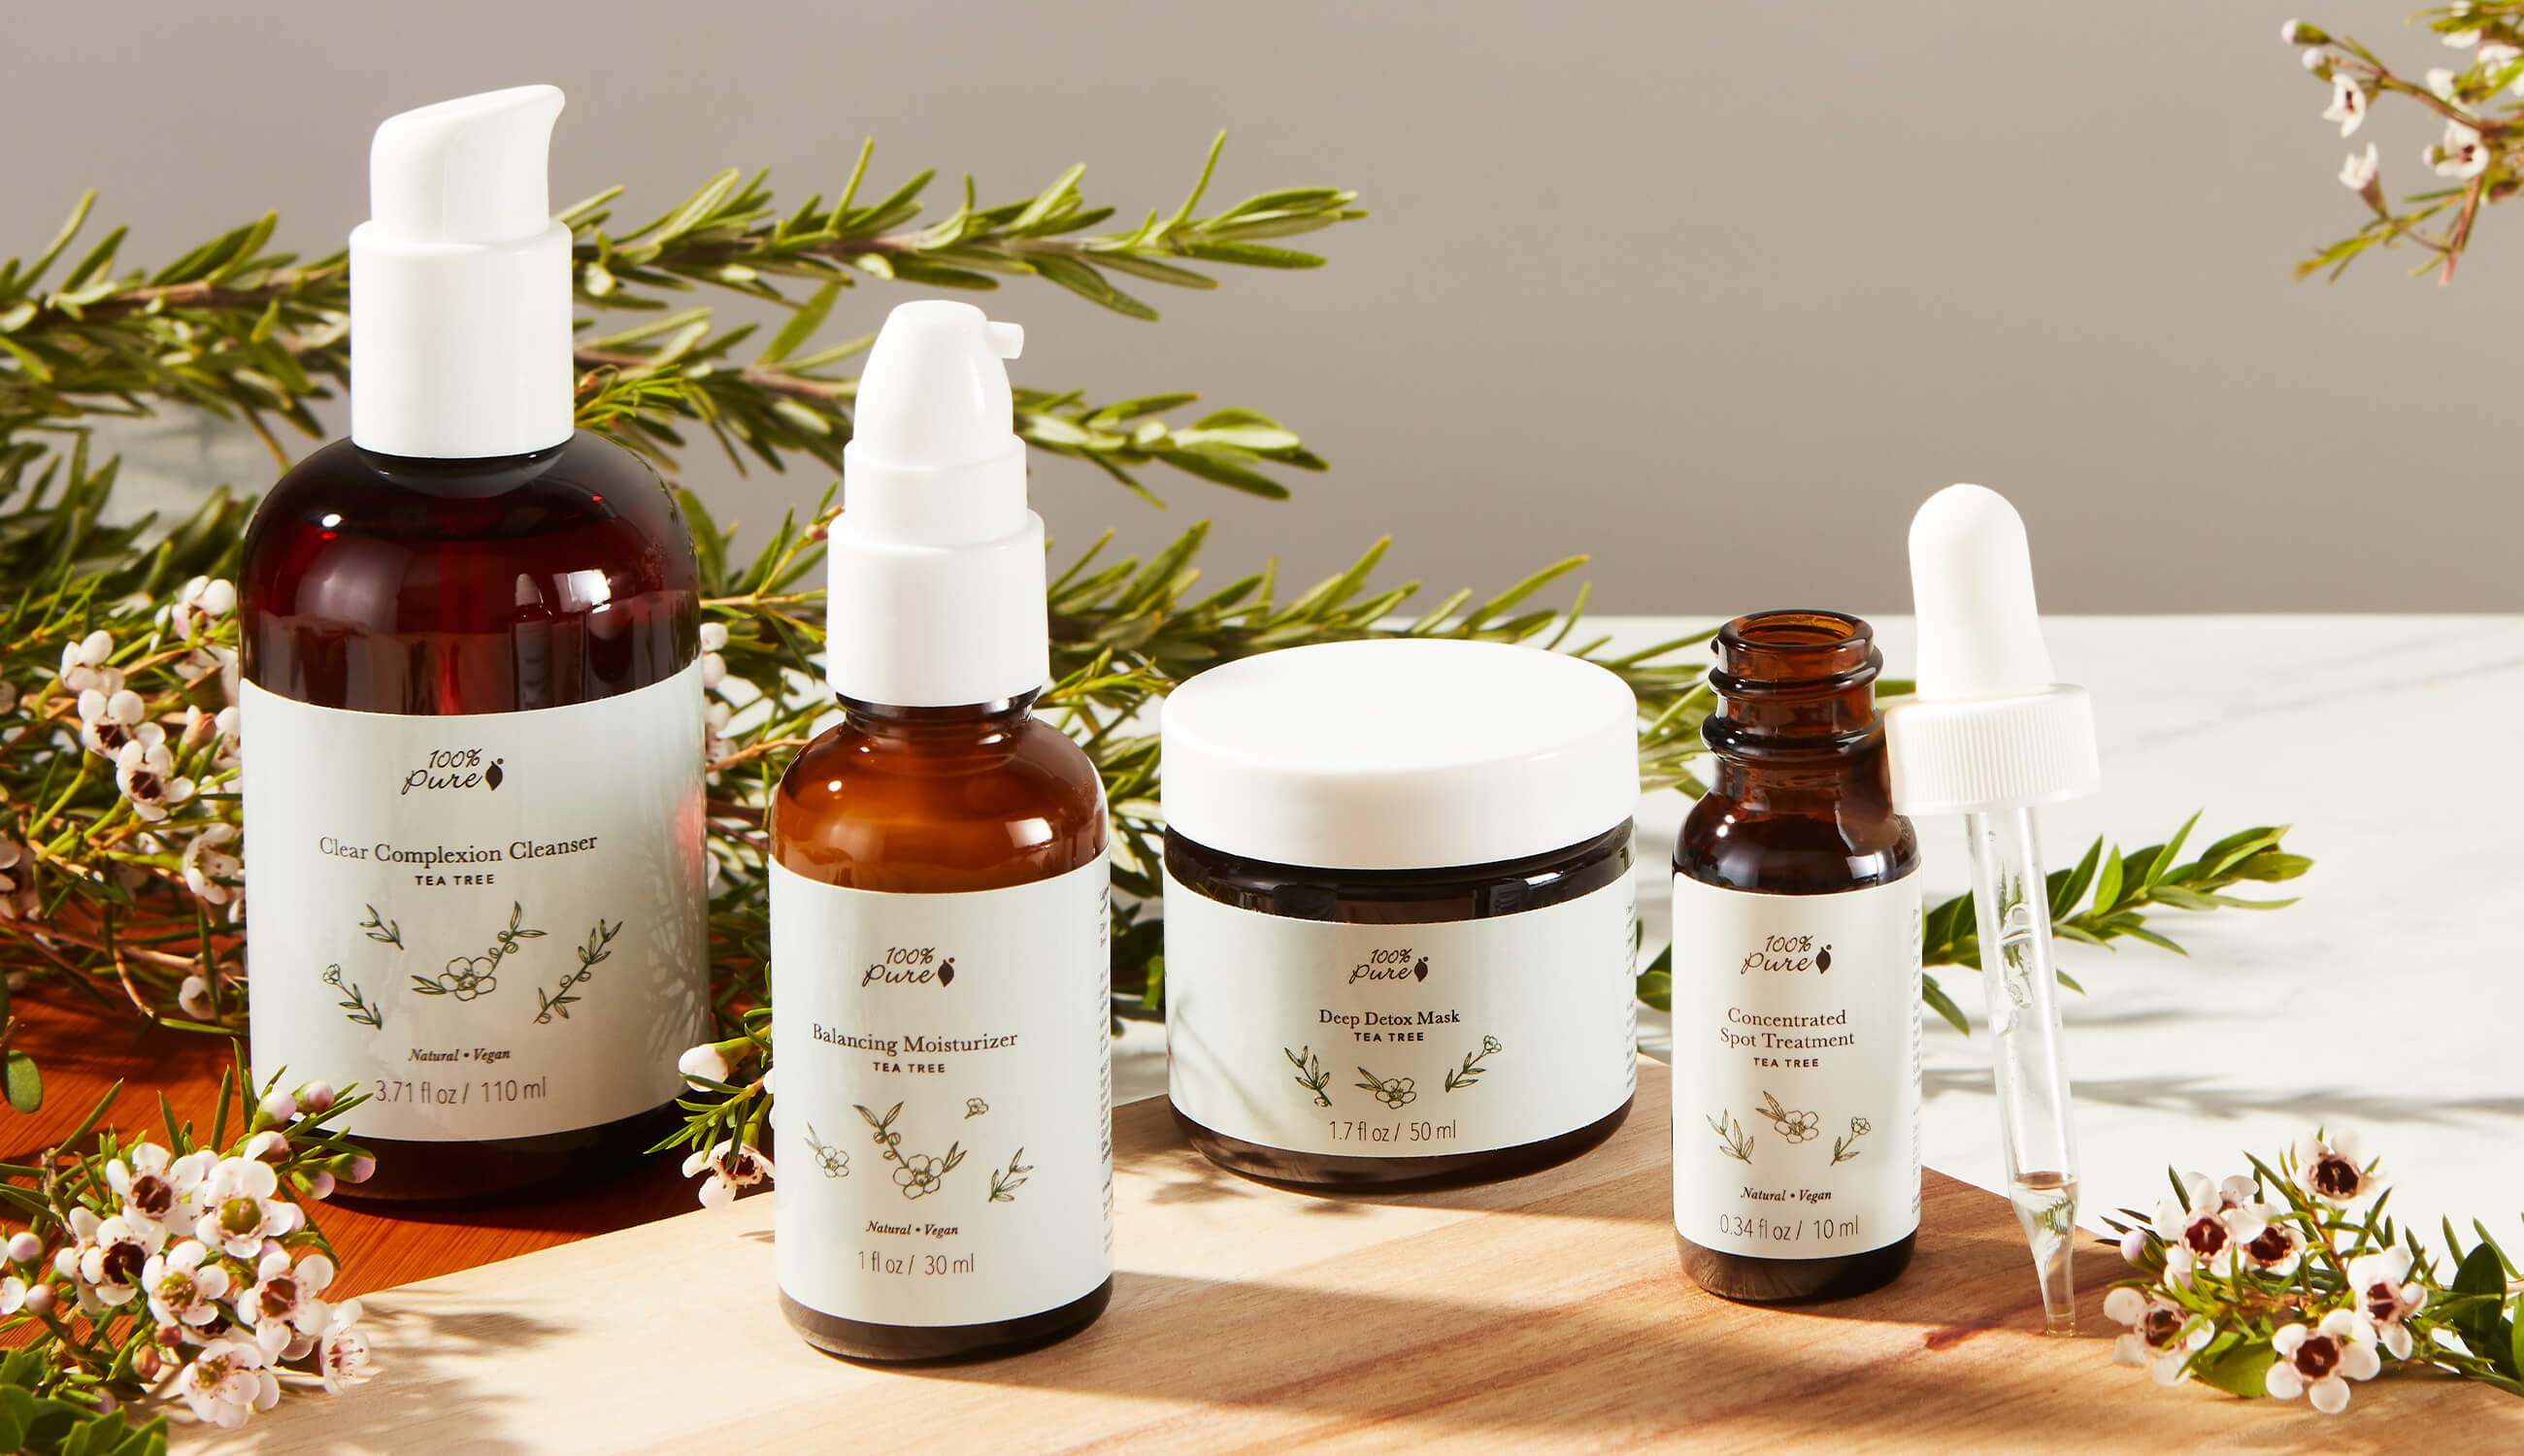 100% PURE Tea Tree products for acne